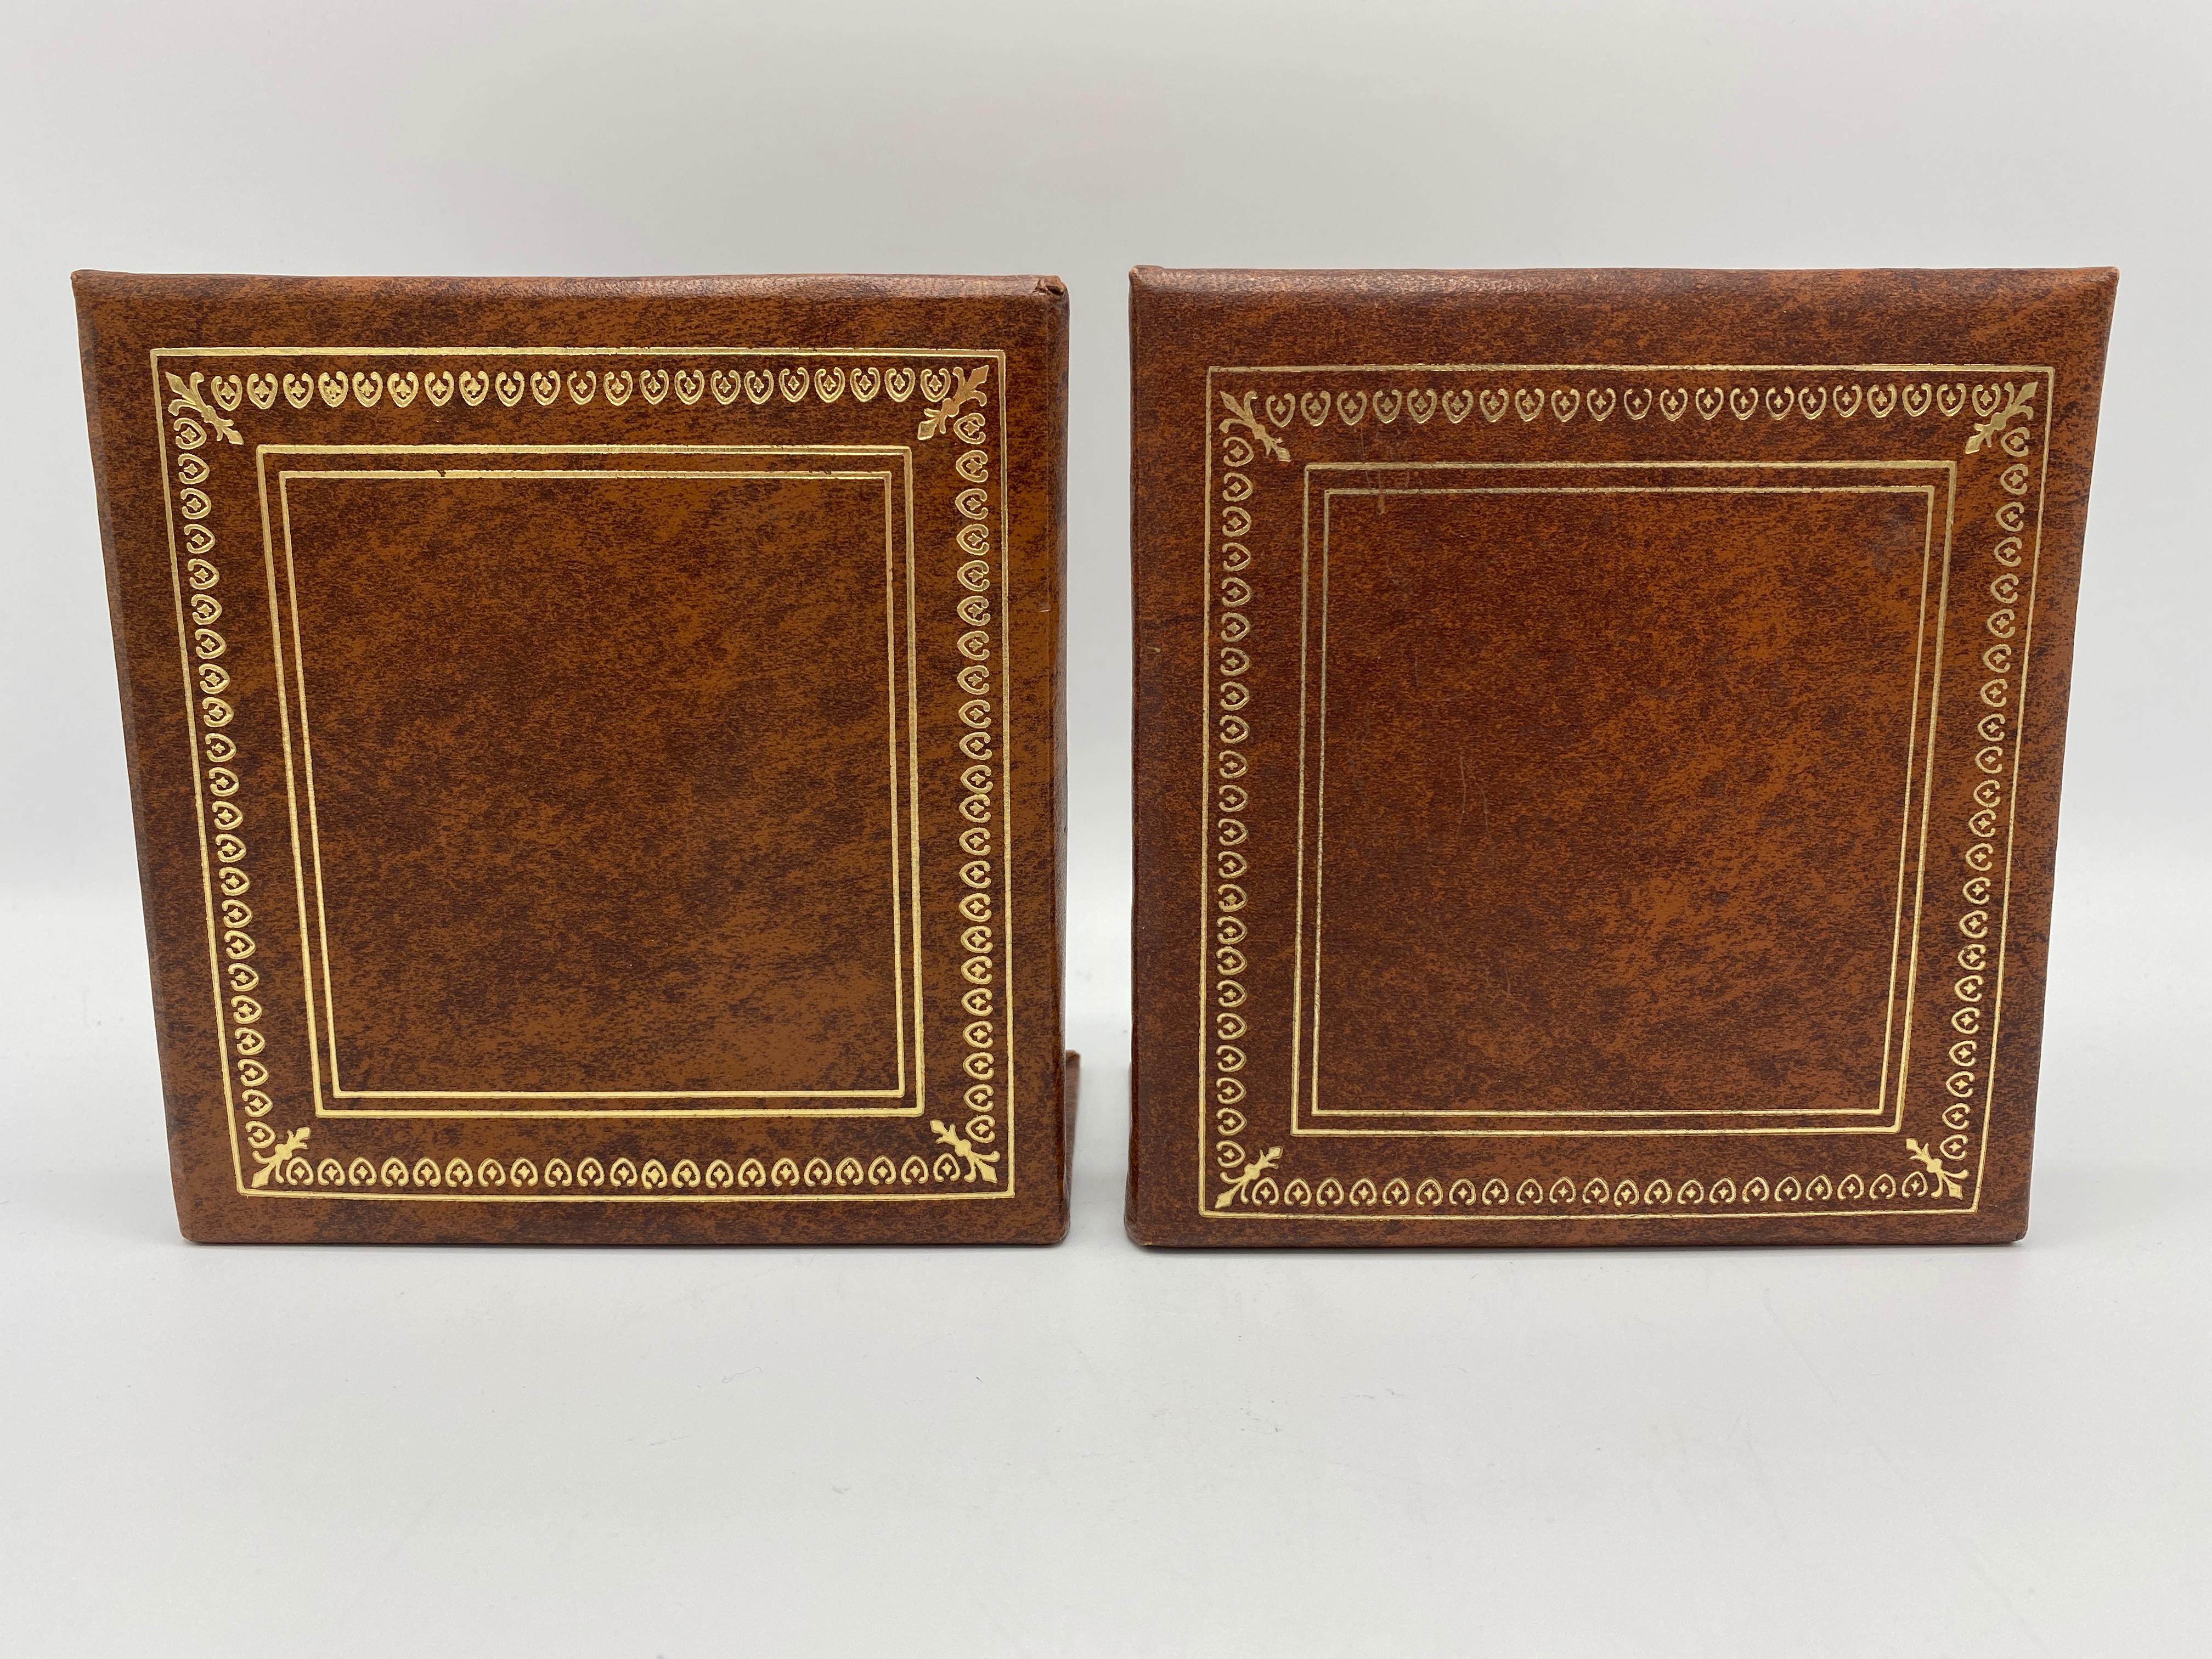 Listed is a stunning and sophisticated, pair of Italian leather bookends, circa 1960s. The pair have a beautiful, marbled brown leather and are accented by a gold debossed border on the outer facing sides. Internal metal framing along the base,